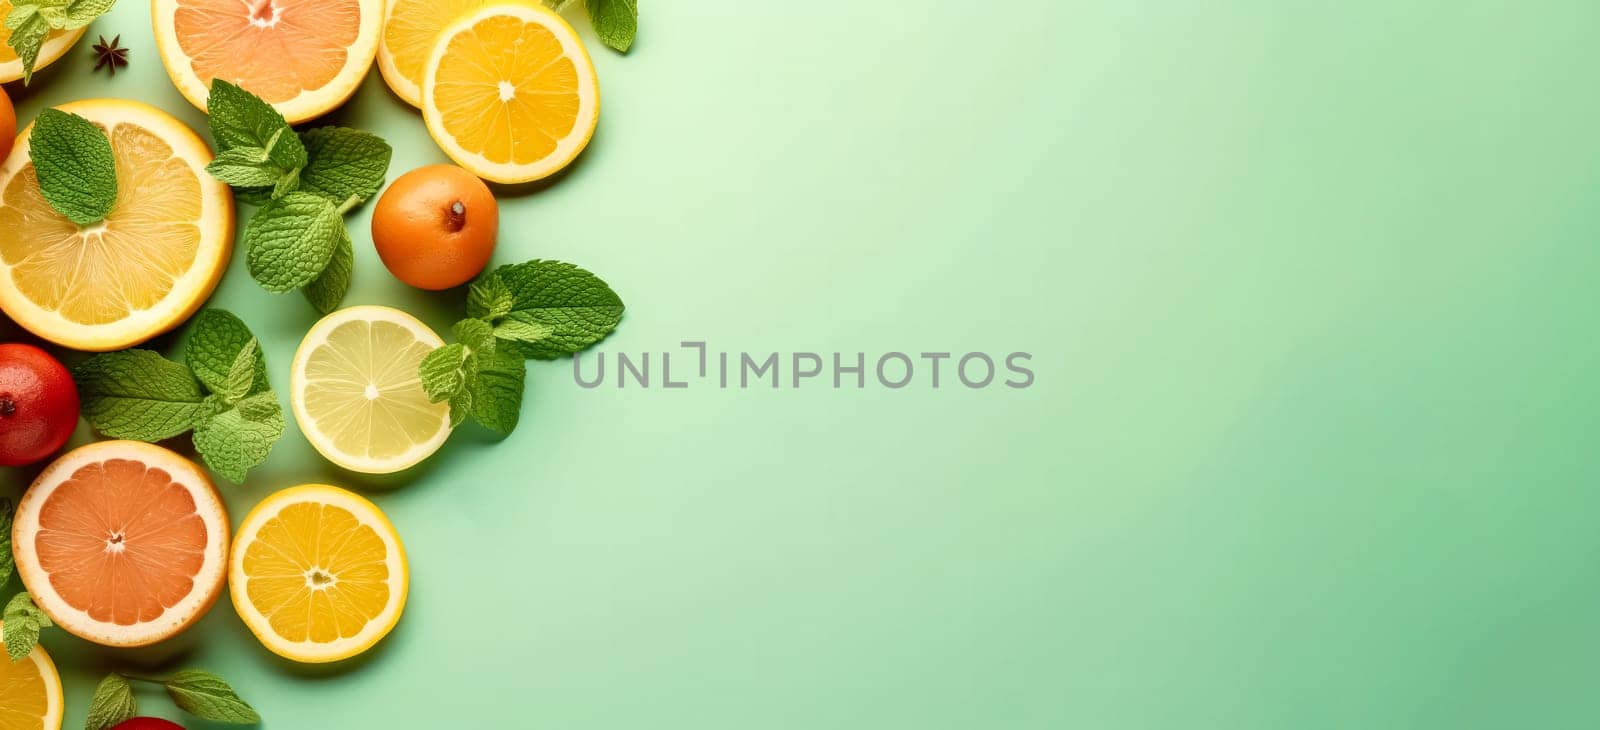 A green background with a variety of citrus fruits including oranges and grapefruit. The fruits are arranged in a circle, with some overlapping and others placed in a more scattered manner